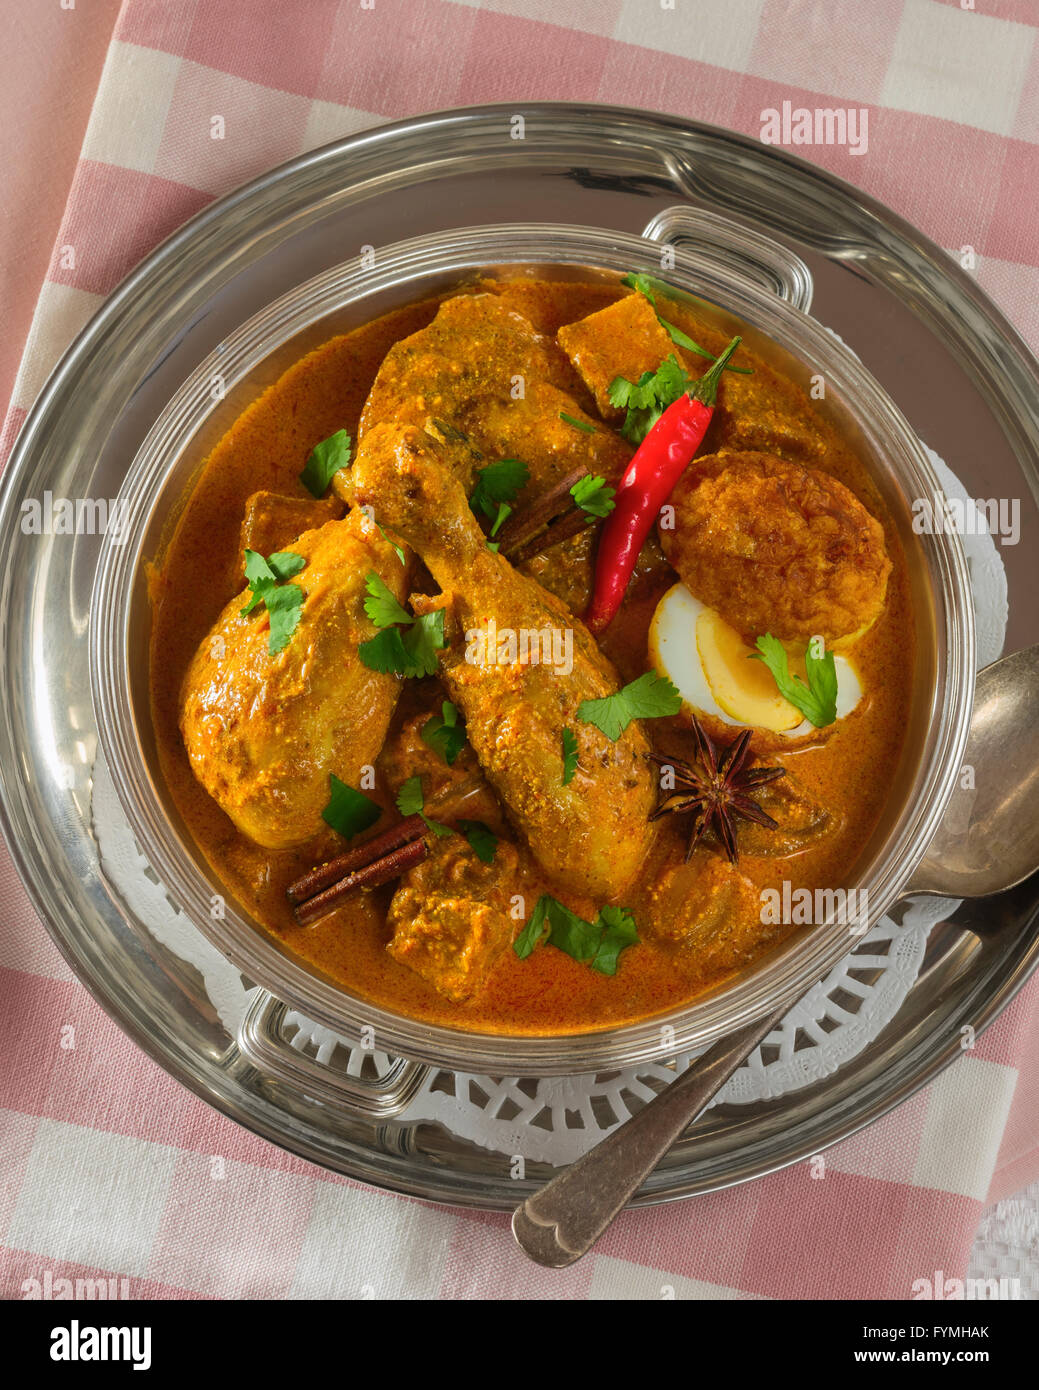 Dak bungalow chicken curry. Anglo Indian food Stock Photo